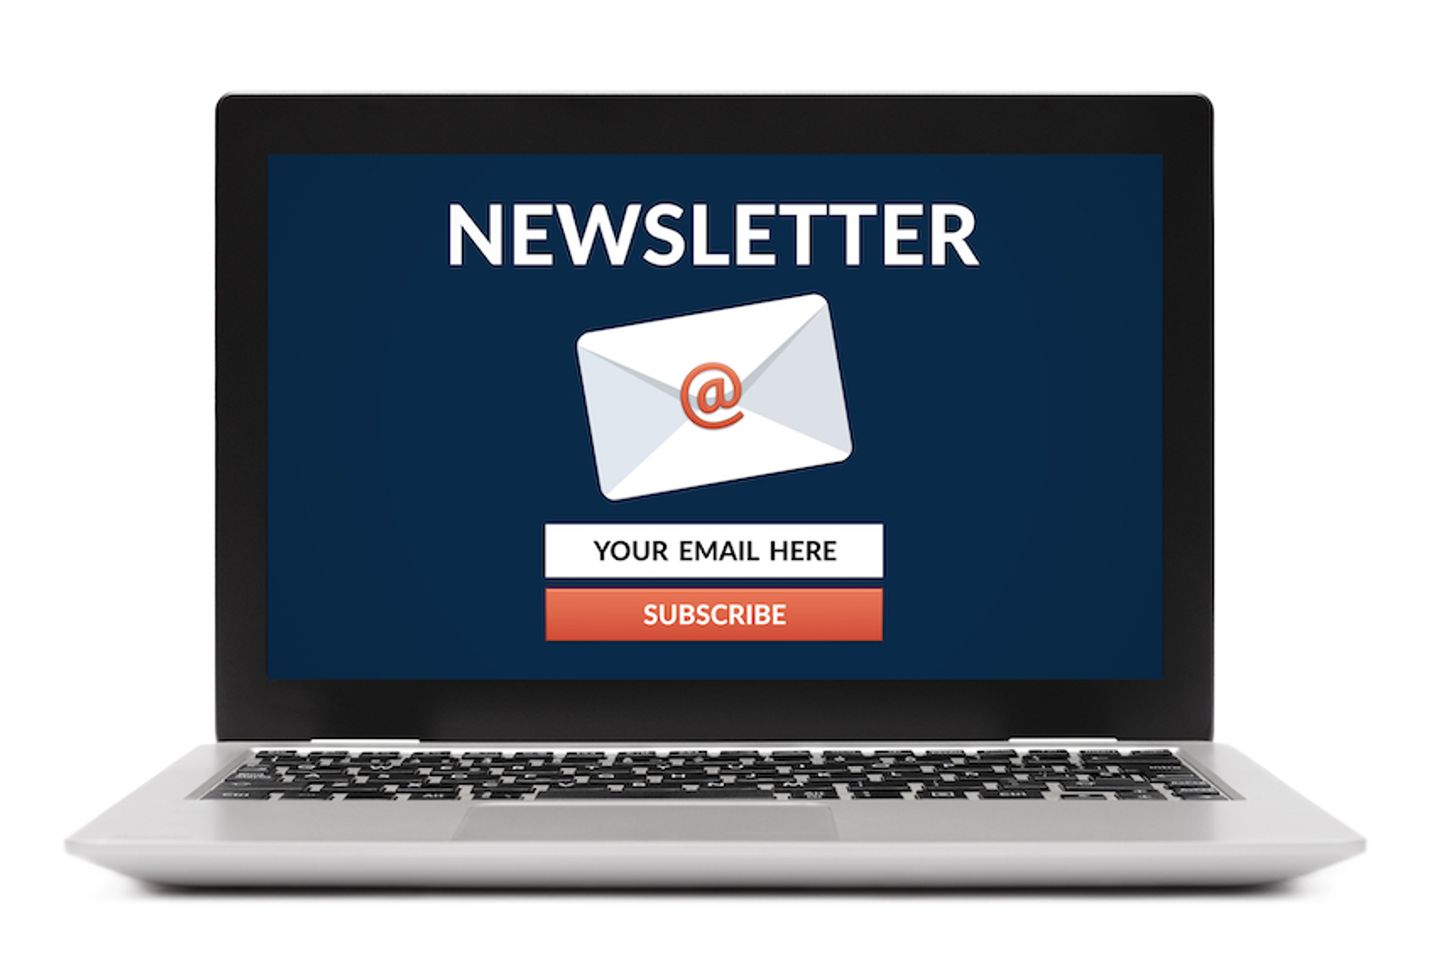 A laptop displaying an email newsletter signup page with the option to subscribe.